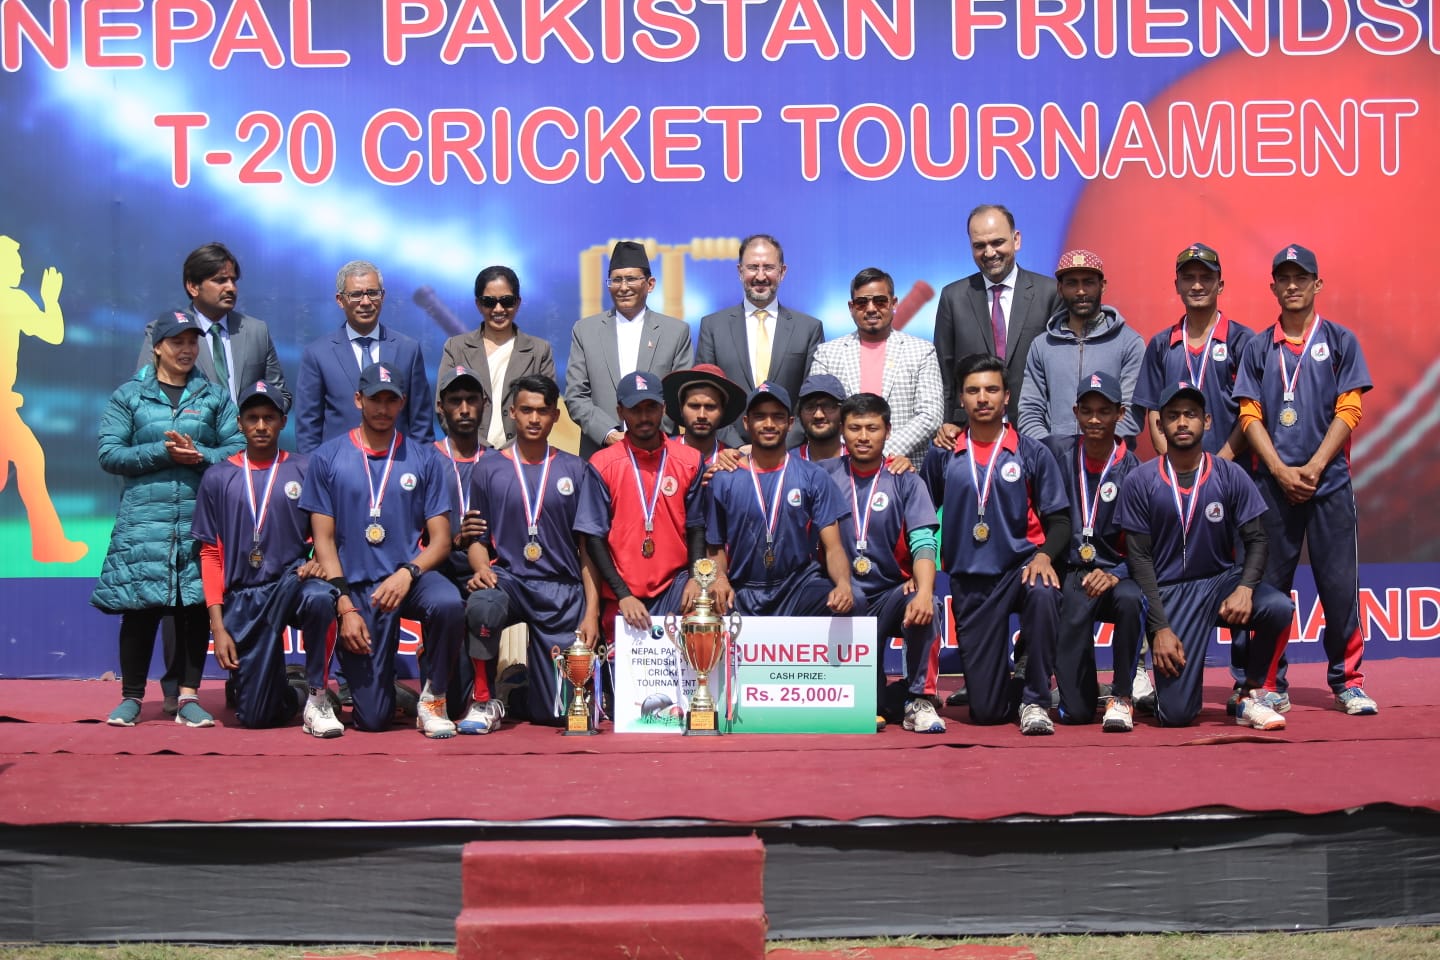 7th-annual-nepal-pakistan-t-20-cricket-tournament-prize-distributed